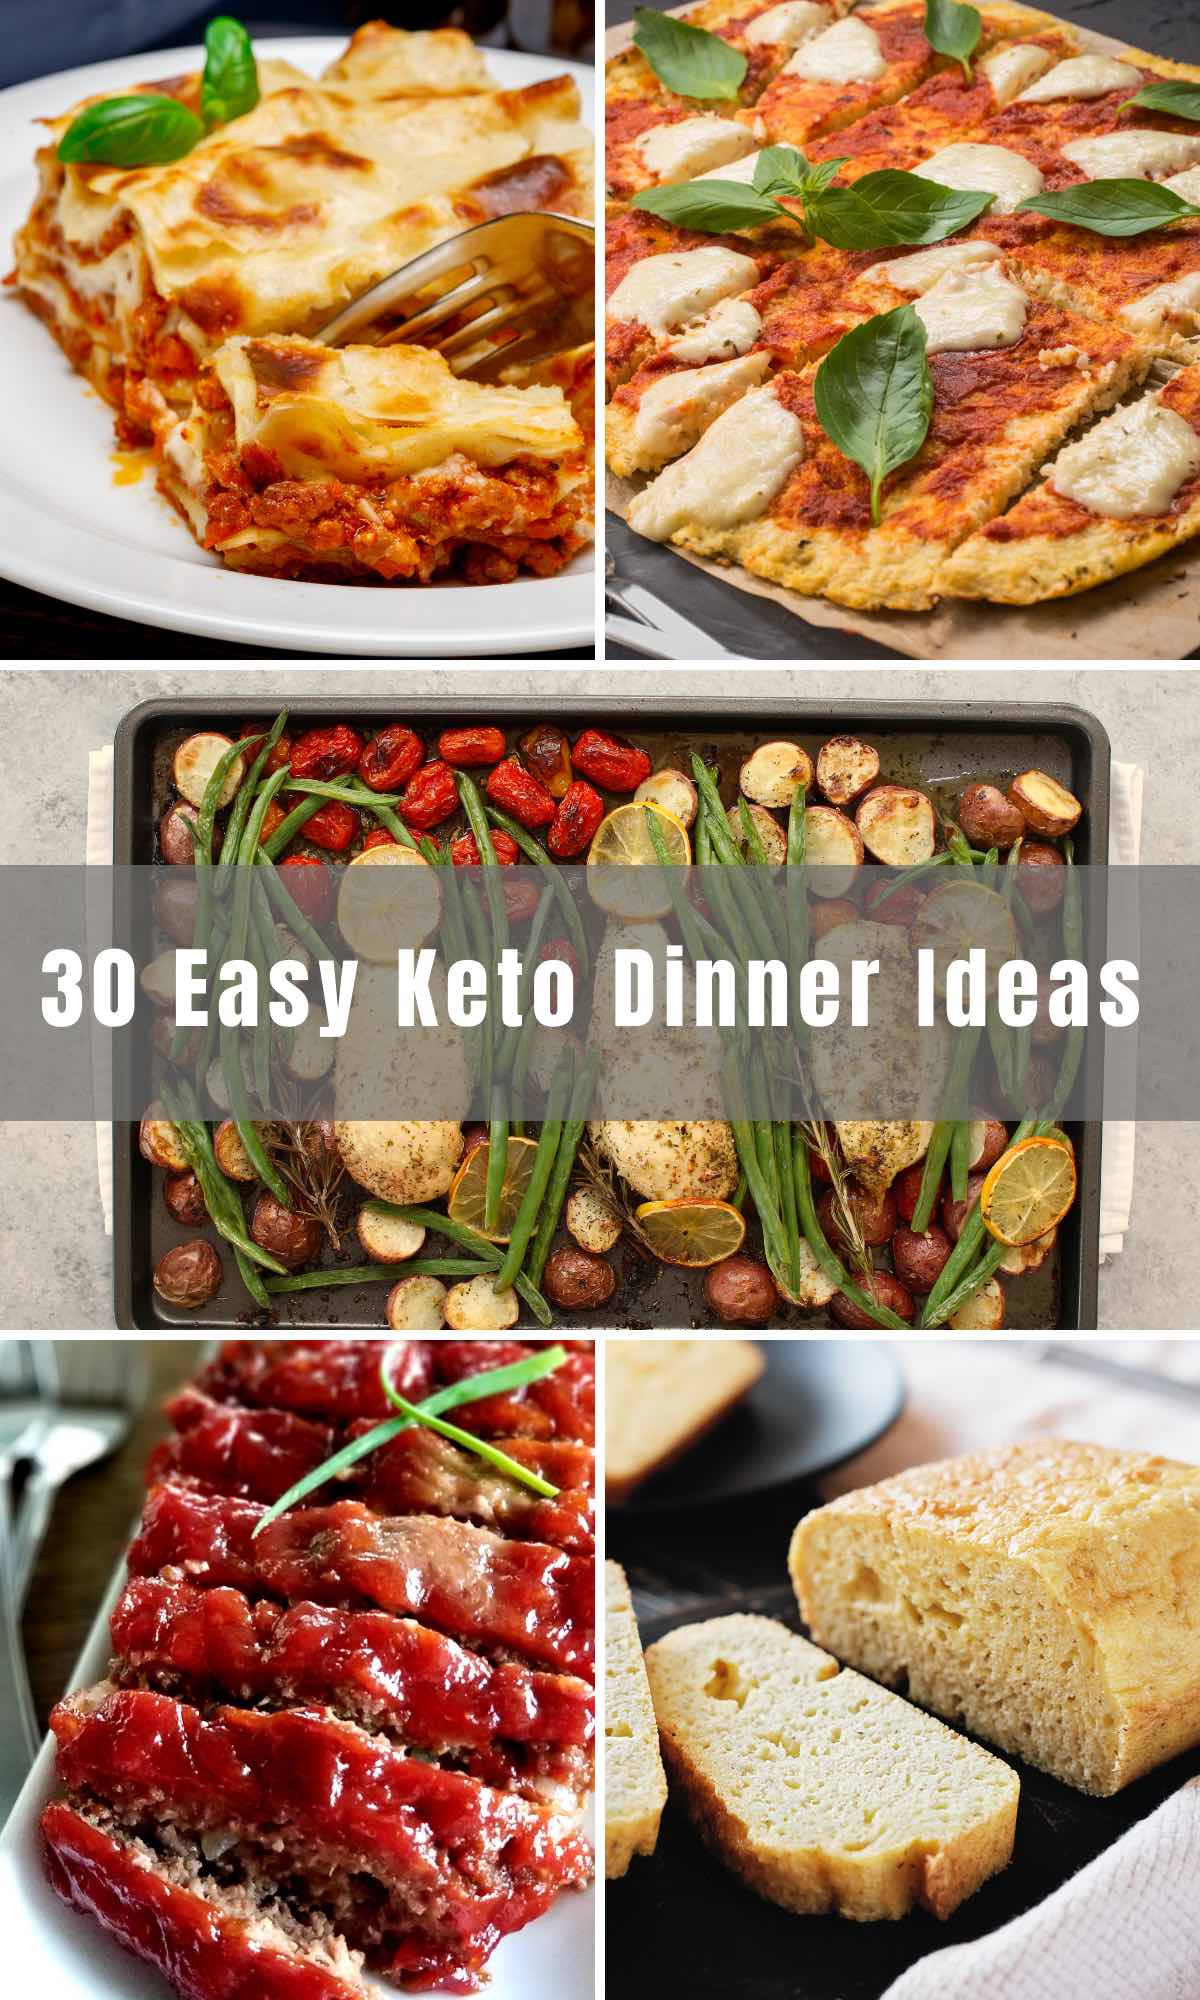 Time to switch to the Keto diet? Worried about what you can and can’t eat? Or are you just dreading your keto meals too boring? Well, worry no more because below you will find 30 Easy Keto Dinner Ideas that are delicious and fun. You'll get to enjoy chicken, beef, cheese, and so much more! Plus, you’ll even get the chance to enjoy bread again!